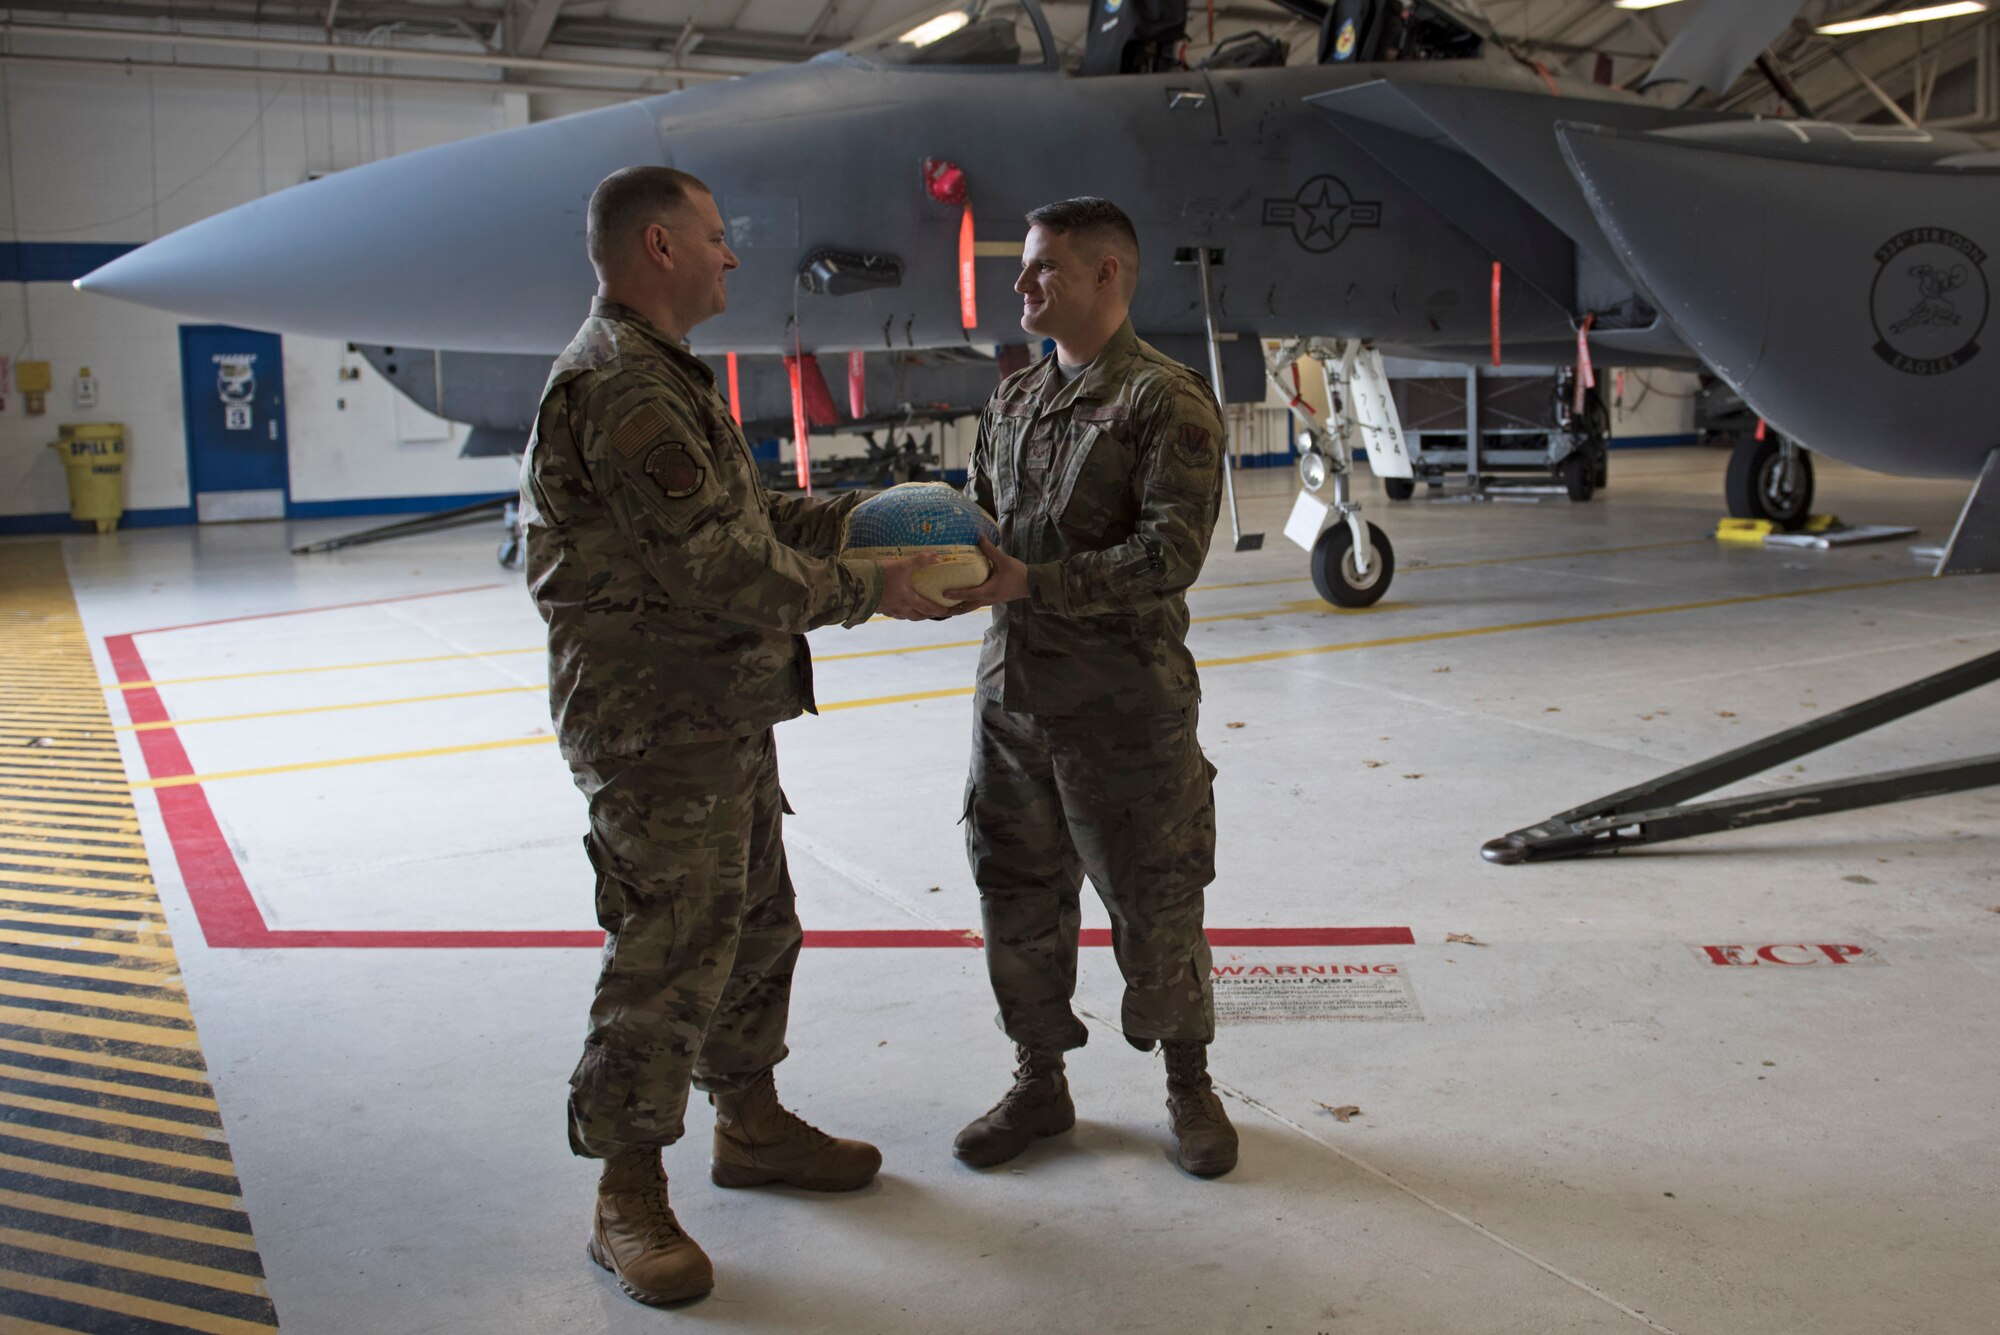 Senior Master Sgt. Michael Holmes, 704th Aircraft Maintenance Squadron first Sergeant, left, delivers a turkey to Senior Airman Franklin Robinson, 704th AMXS crew chief, Nov. 19, 2019, Seymour Johnson Air Force Base, N.C. Airmen from throughout the base were chosen by their leadership to receive a turkey and side dish items for Thanksgiving dinner. (U.S. Air Force photo by Senior Airman Victoria Boyton)